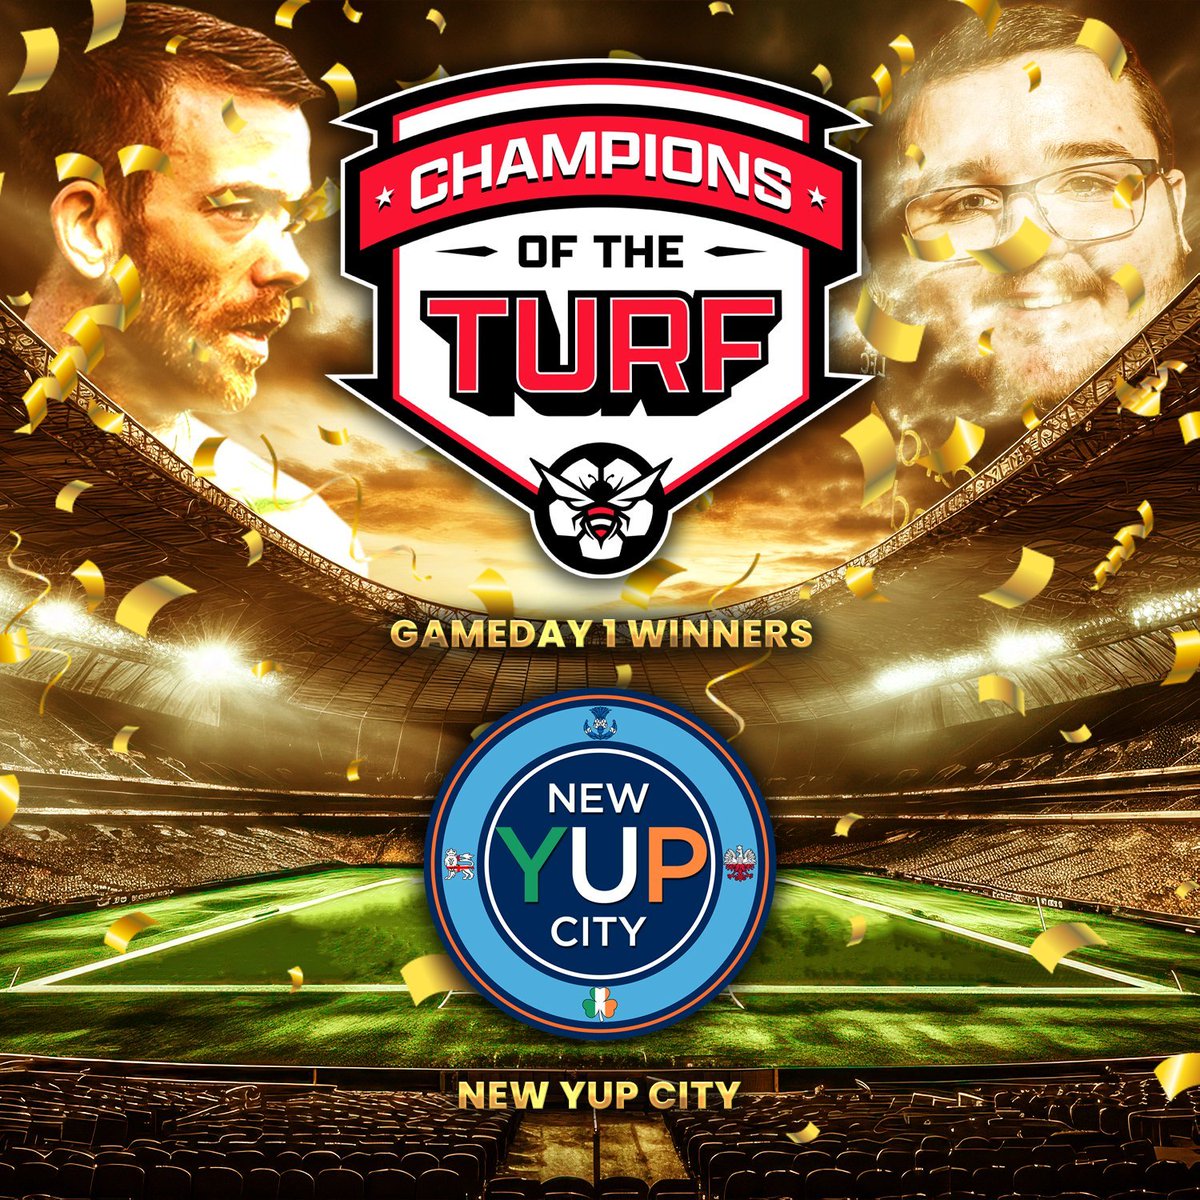 🚨WE ARE LIVE🚨

➡️DAY 2 OF @GNTFC_Official TOURNAMENT
➡️GARA'S COMMUNITY VS @NEWYUPCITY
➡️WEEKEND VIBES

GET IN HERE!👇🔥

twitch.tv/thegarashow